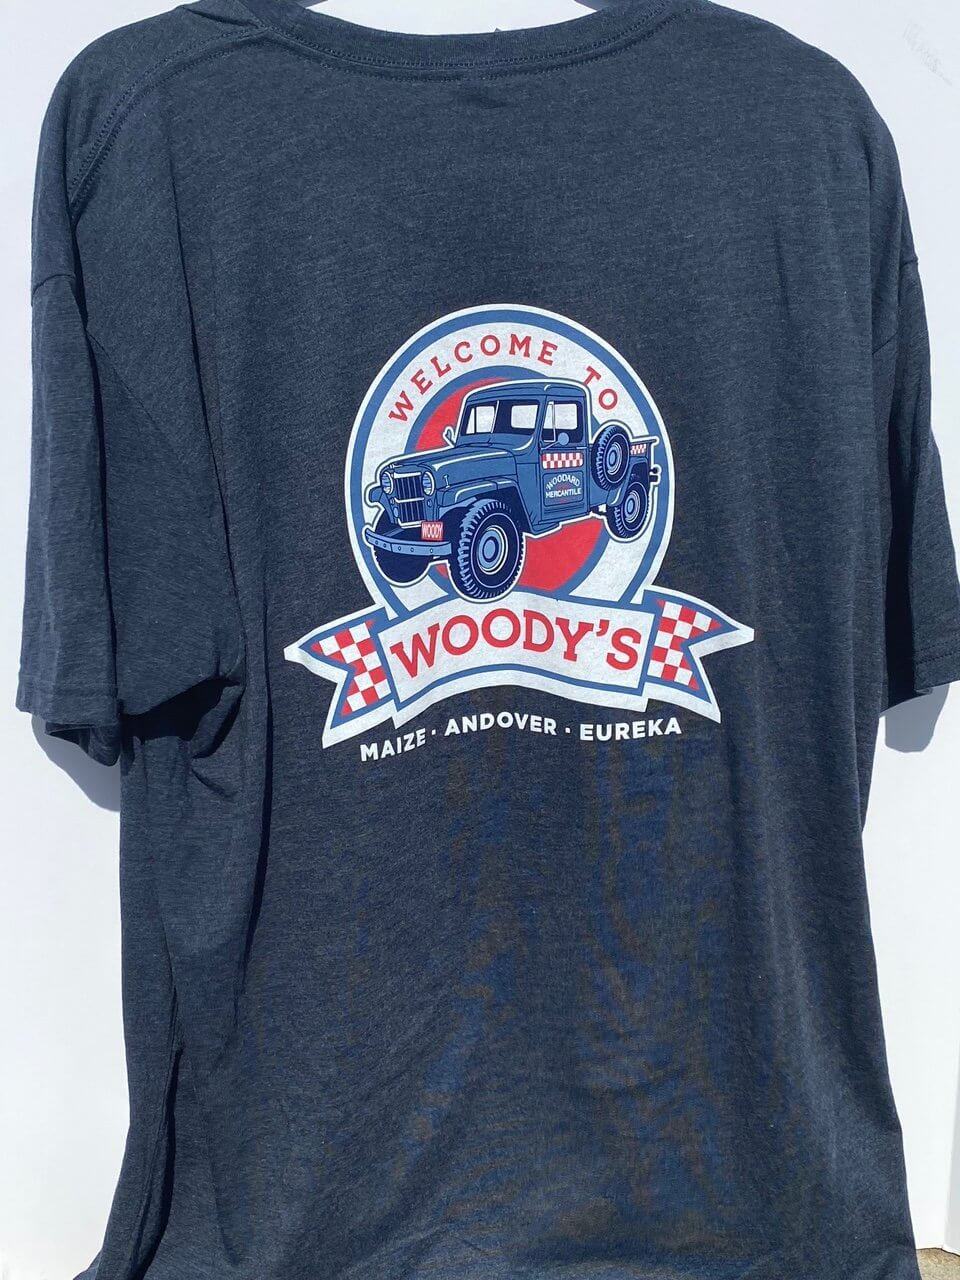 T Shirt Welcome To Woody